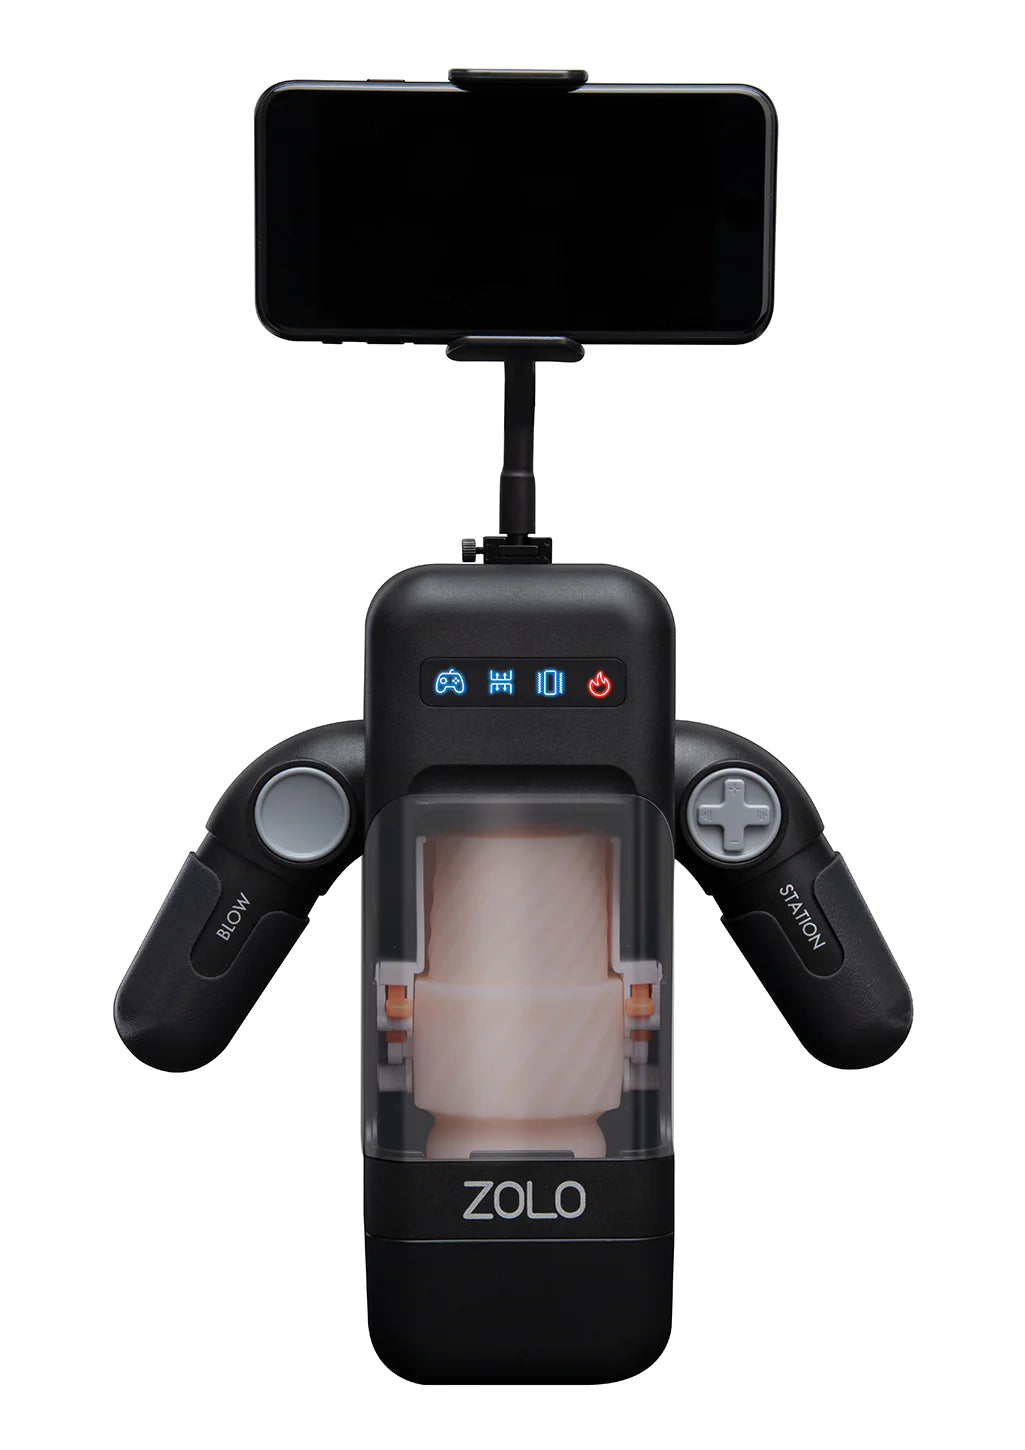 Zolo Blowstation Rechargeable Masturbator image of product standing up with the phone mount attached.